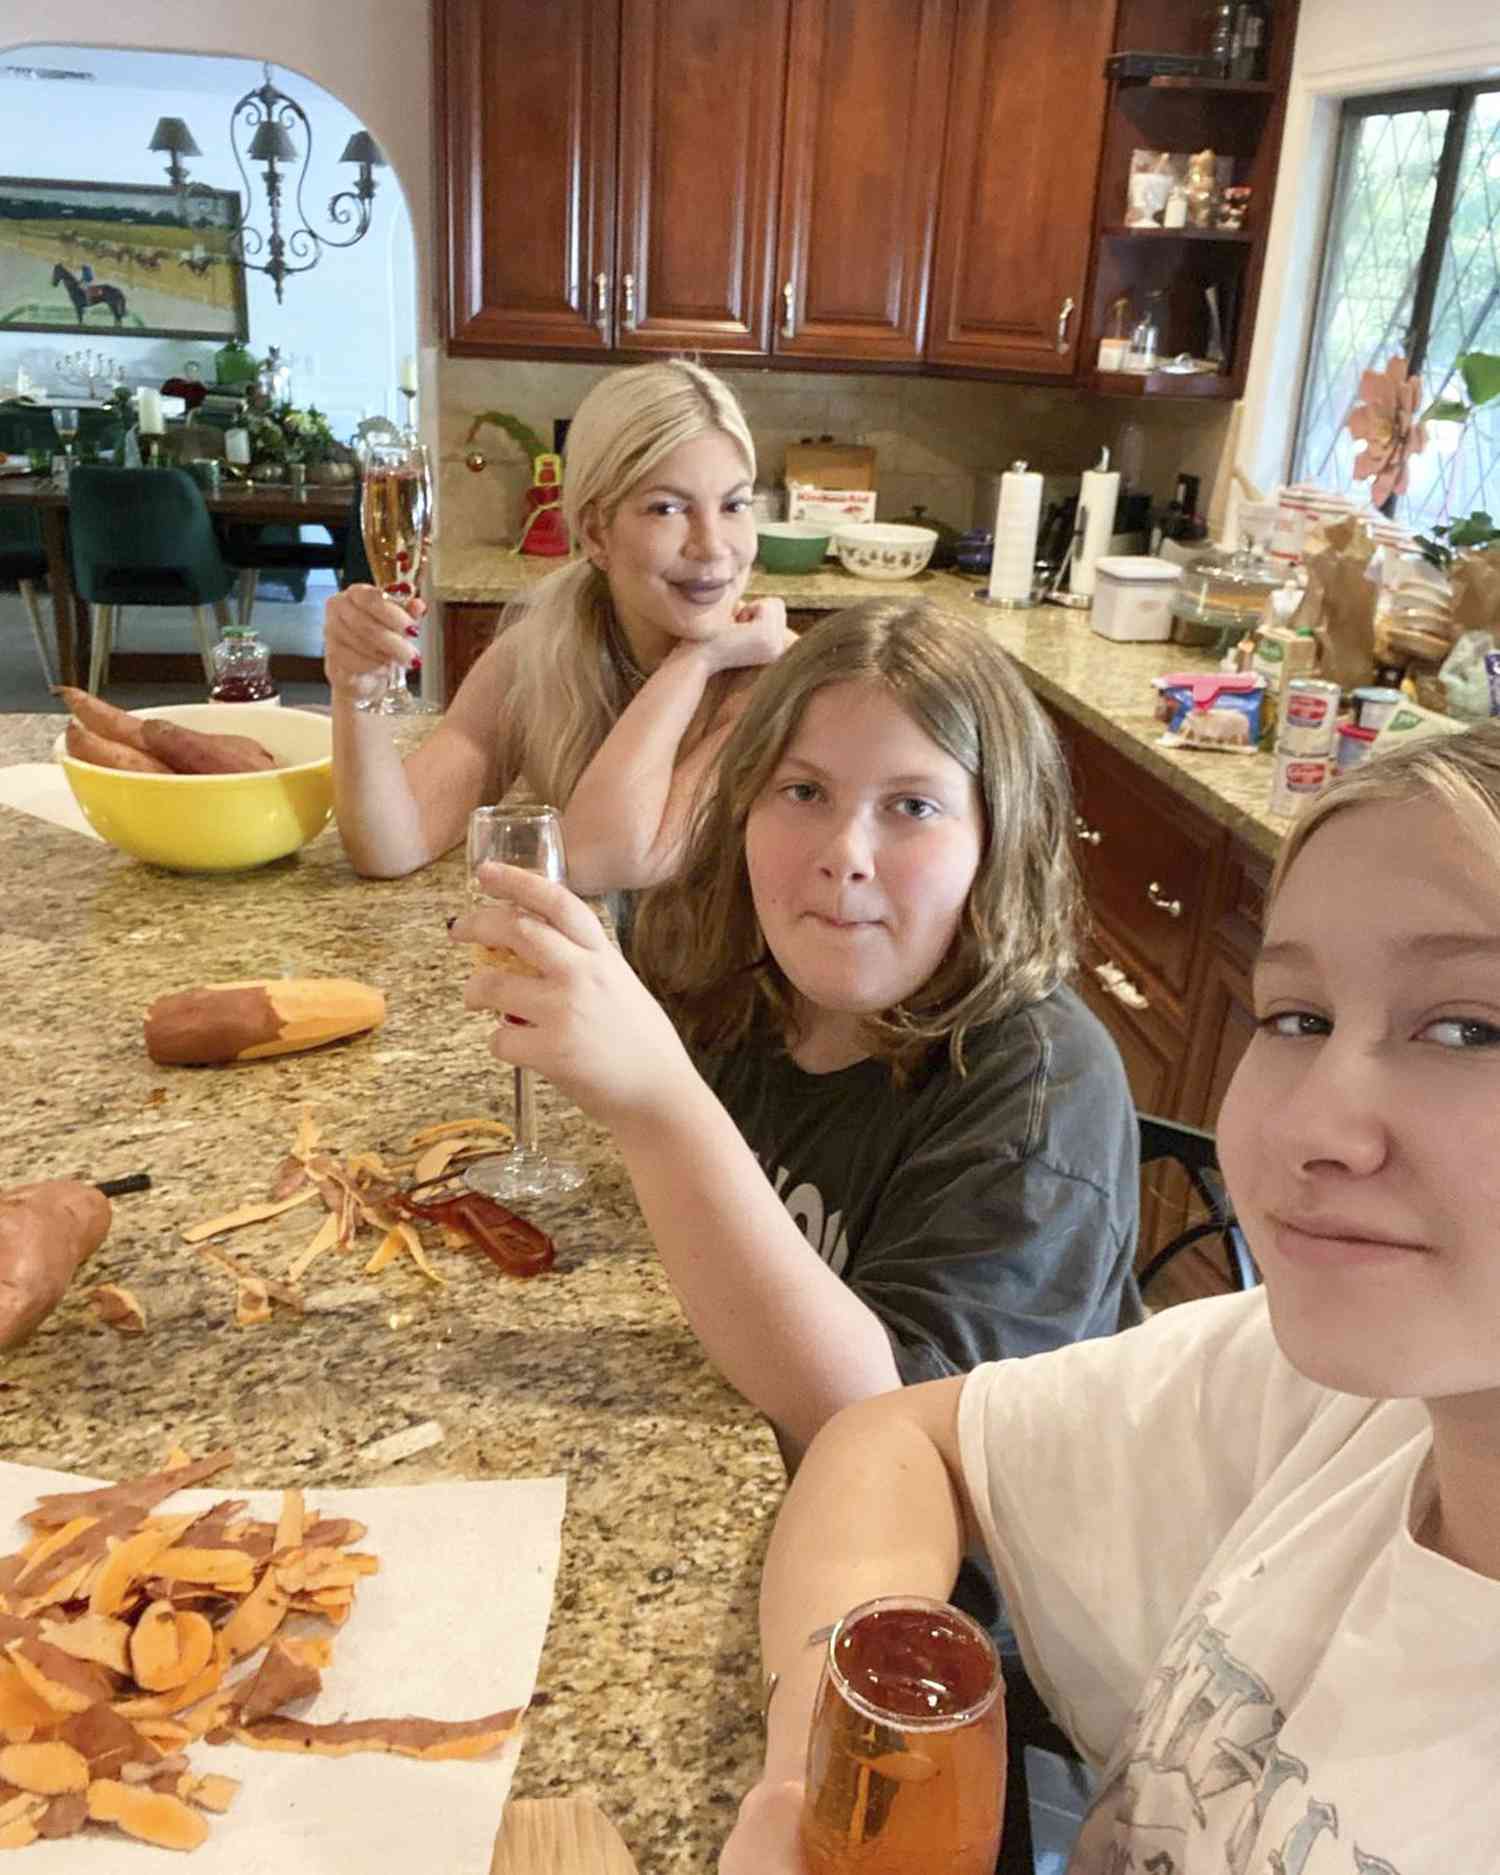 Tori Spelling Celebrates Thanksgiving with 'Empowered' Daughters amid Marriage Trouble Claims - Yahoo